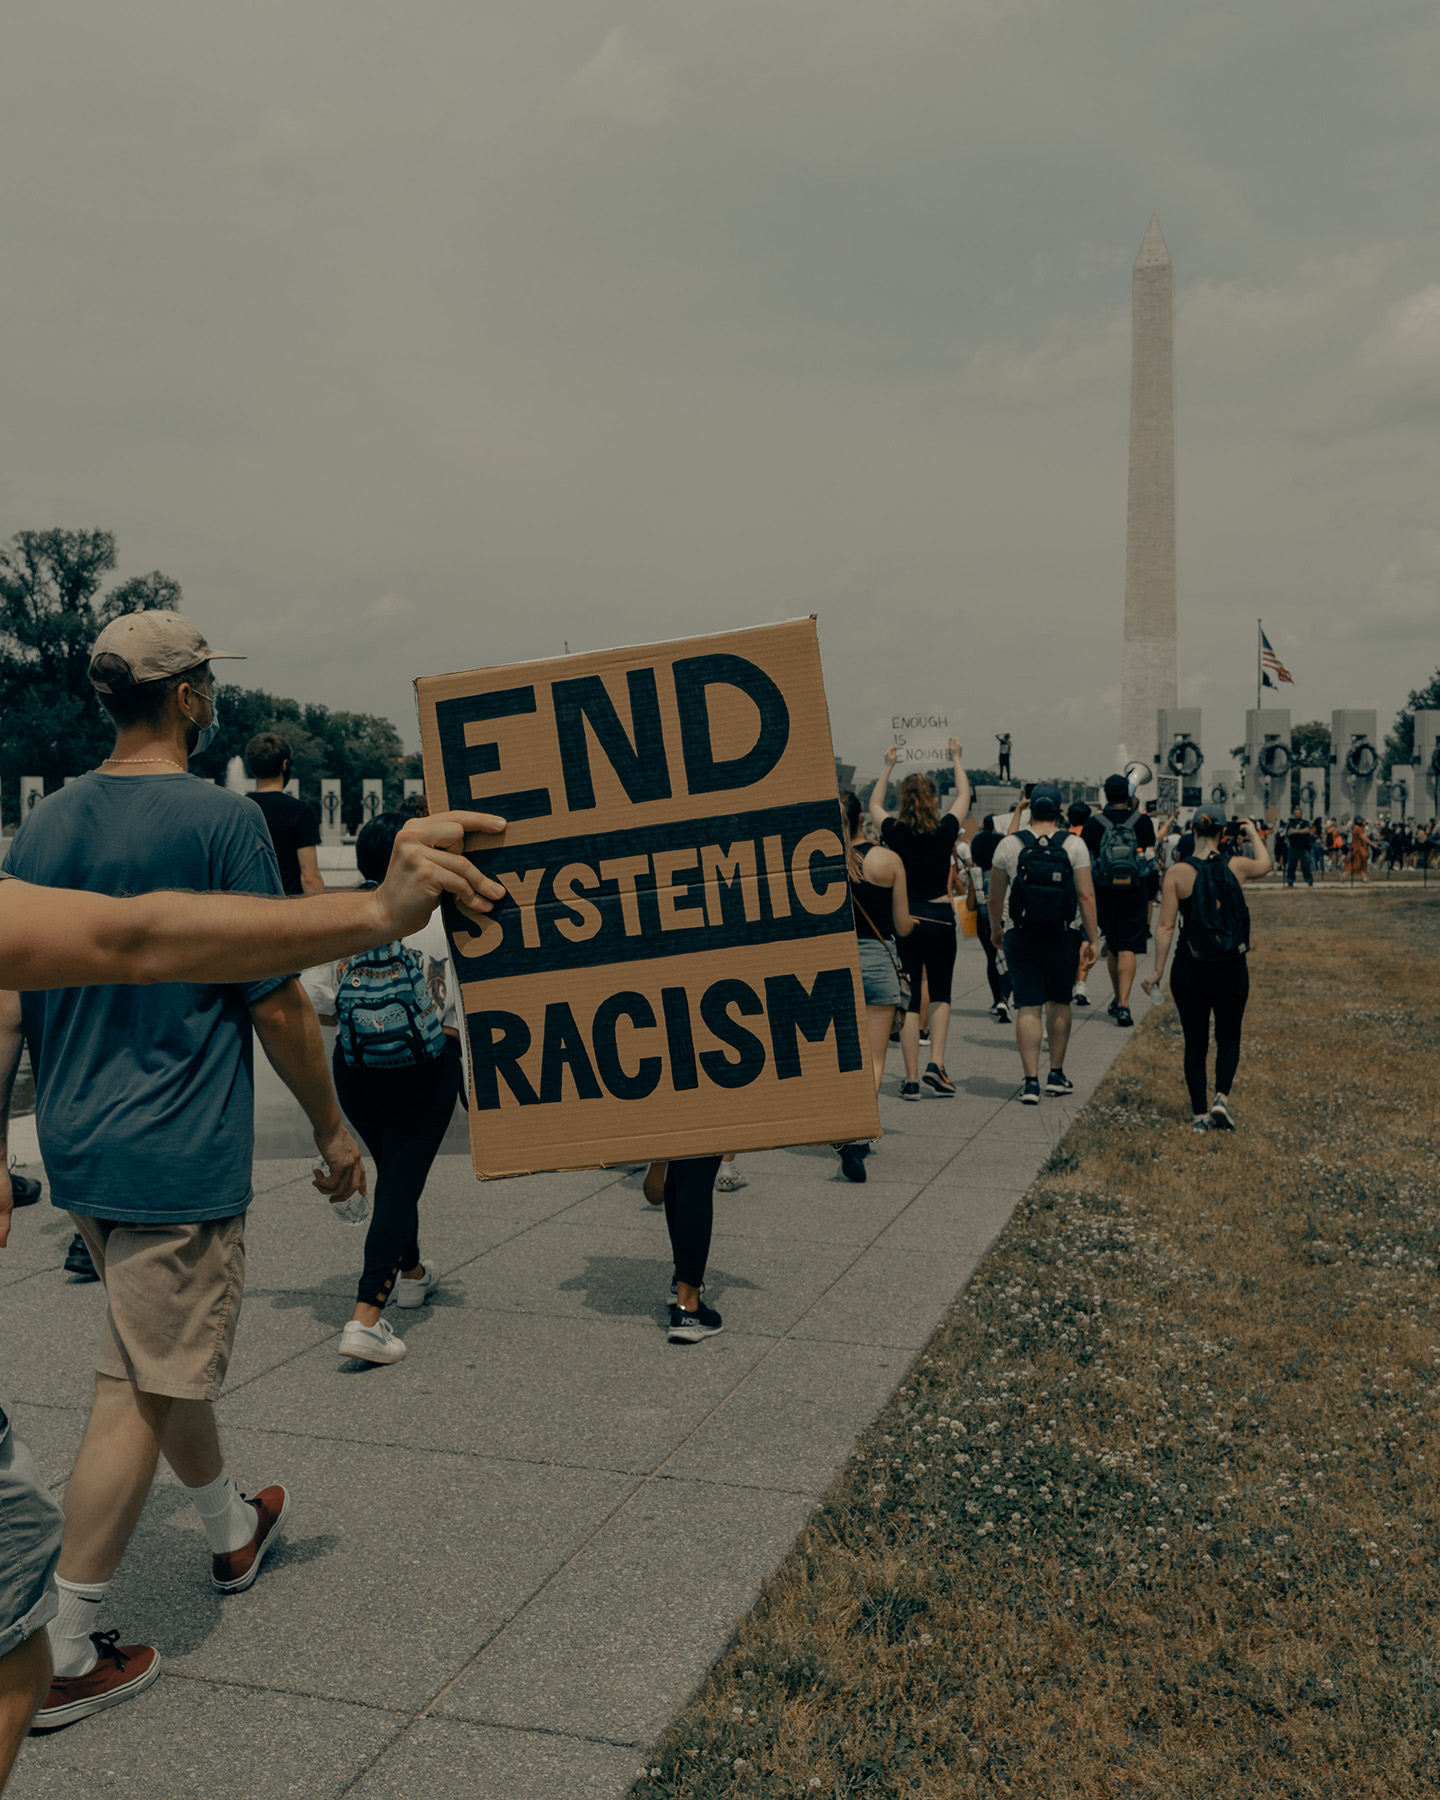 A protest sign reads "End Systemic Racism"